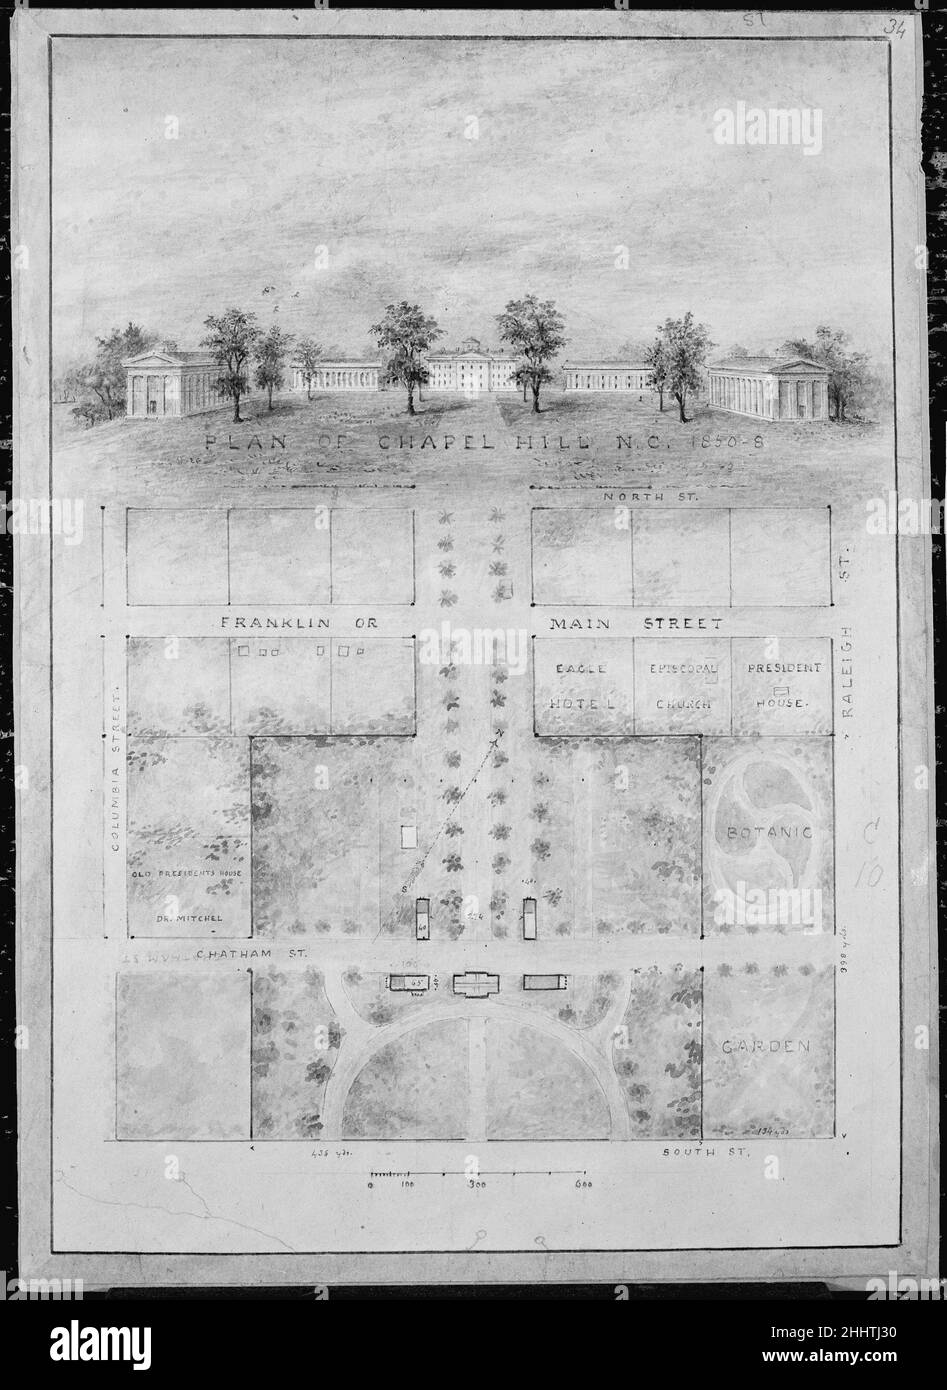 University of North Carolina, Chapel Hill (distant perspective and plan of grounds) 1850–58 Alexander Jackson Davis American. University of North Carolina, Chapel Hill (distant perspective and plan of grounds). Alexander Jackson Davis (American, New York 1803–1892 West Orange, New Jersey). 1850–58. Watercolor, ink and graphite Stock Photo